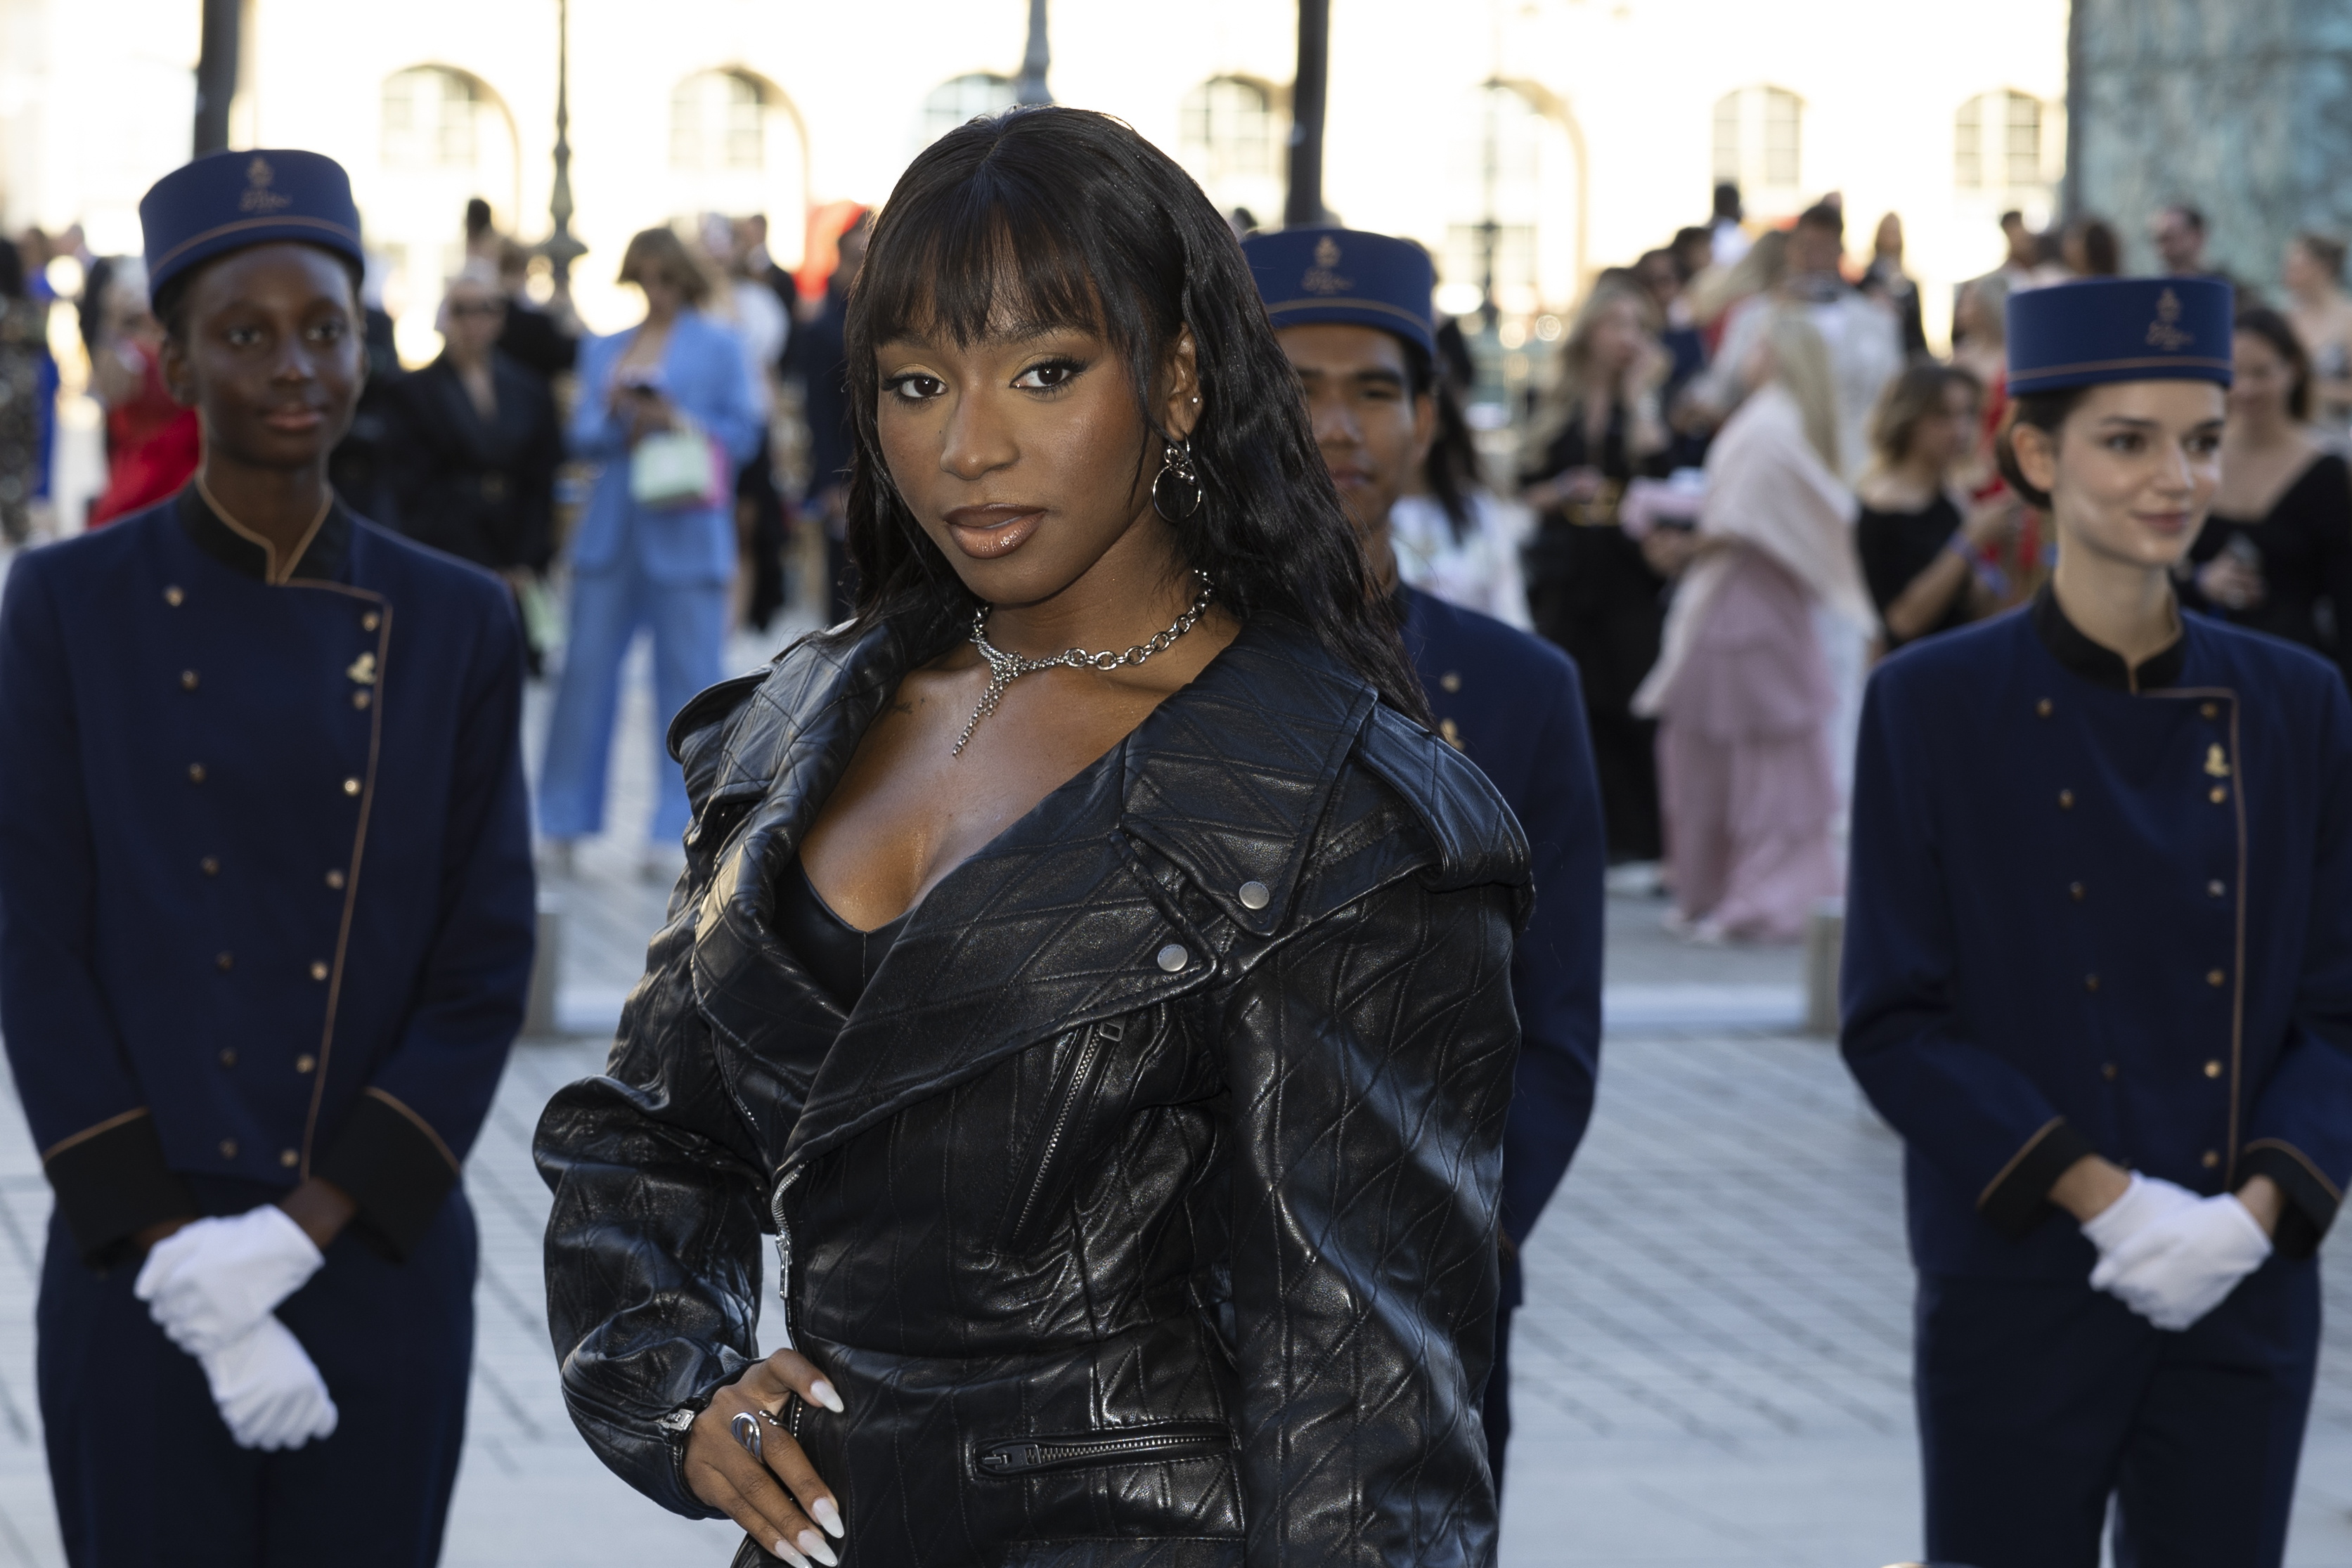 Fans of Normani, see at Vogue World: Paris, expressed sympathy for the star online